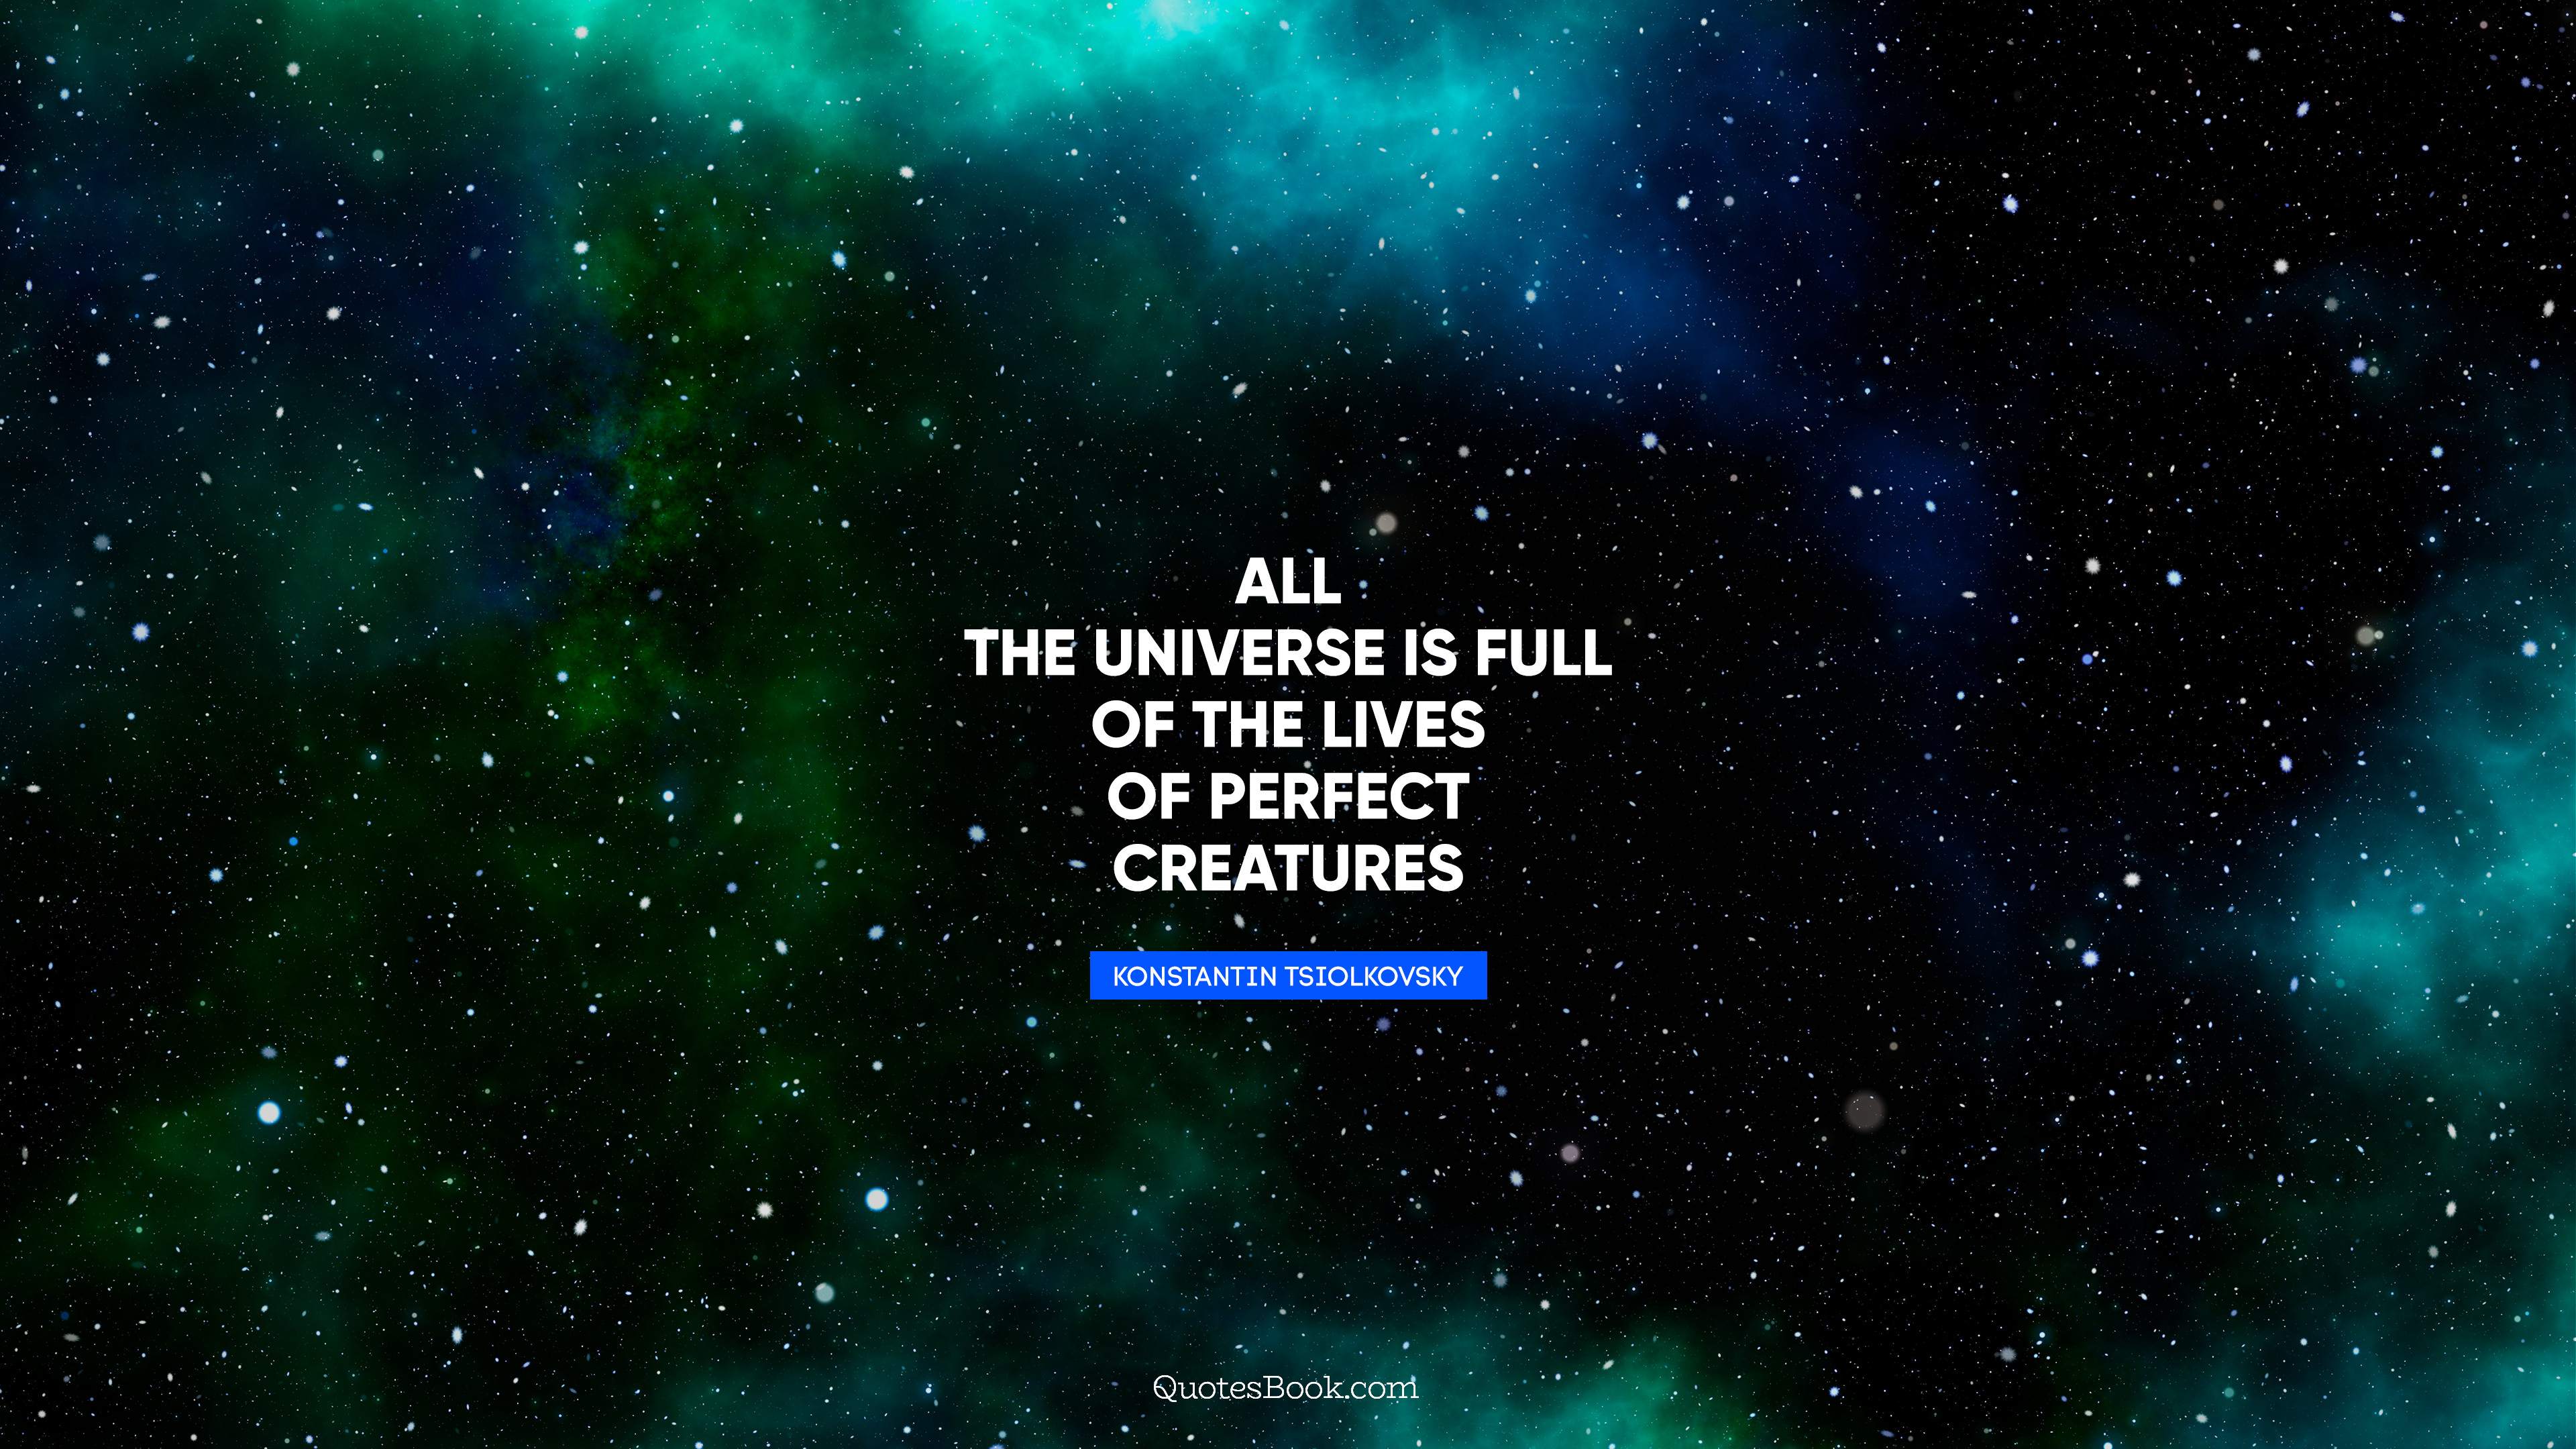 All the universe is full of the lives of perfect creatures. - Quote by